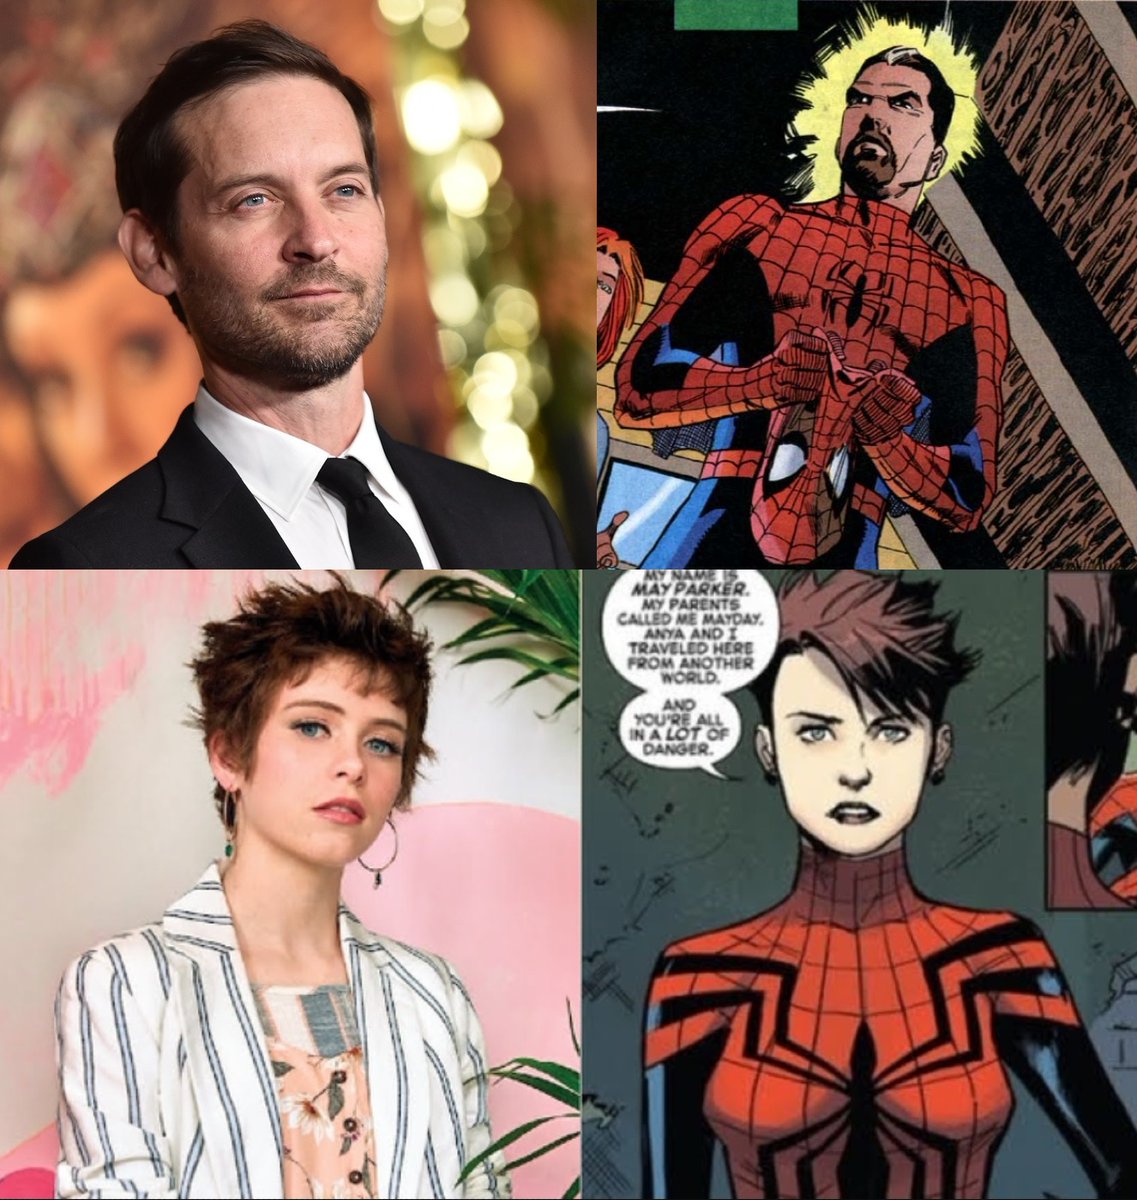 @SonyPictures Please @SonyPictures , give Sam Raimi a chance to make Spider-Man 4 with Tobey Maguire. They could adapt the story where Peter Parker is over 40 years old, married to MJ, and they have a daughter named Mayday Parker who becomes Spider-Girl 🥺🙏
#MakeRaimiSpiderMan4